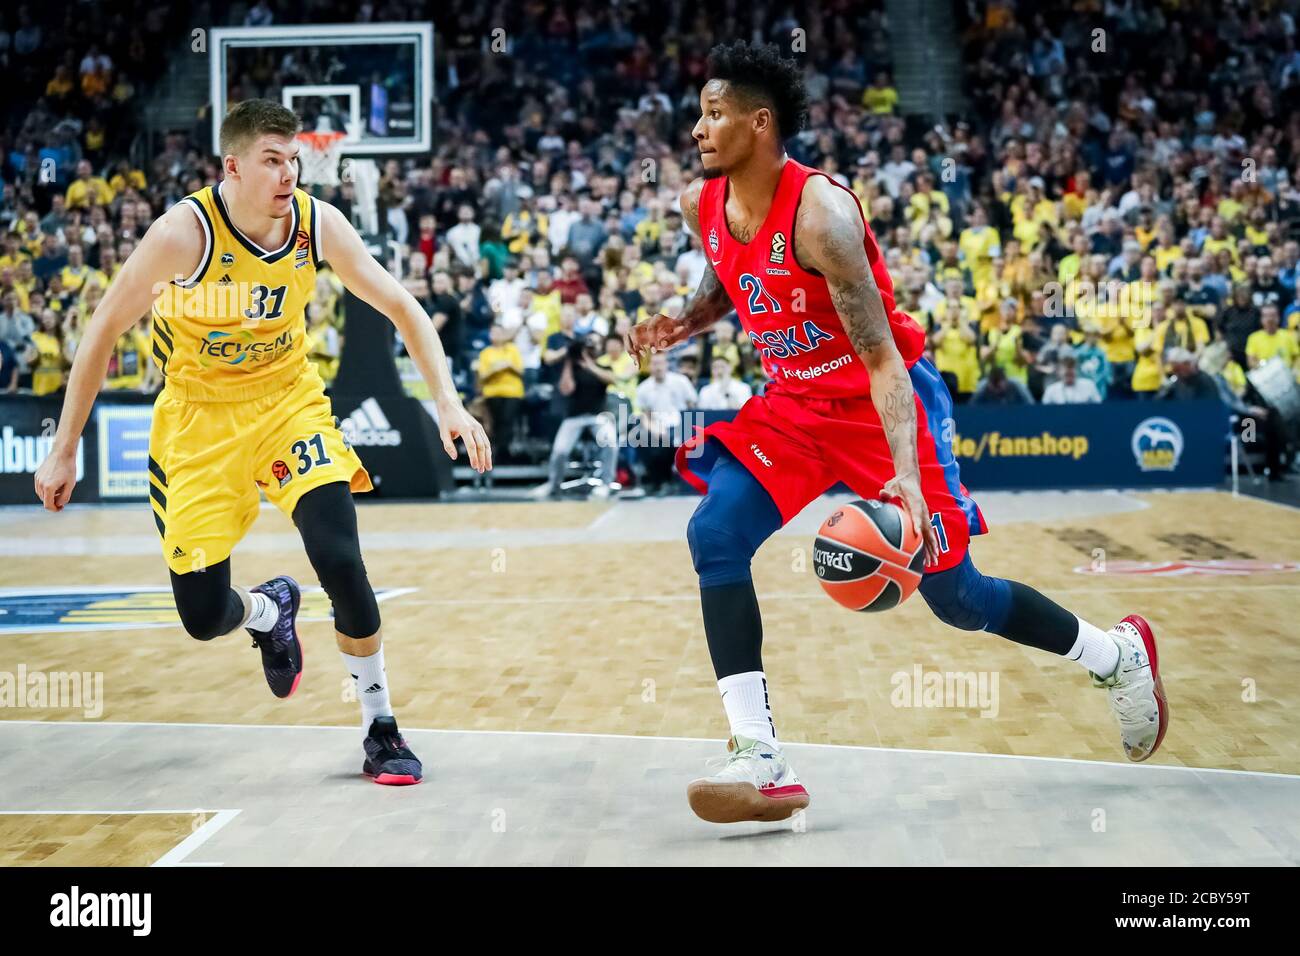 Berlin, Germany, October 25, 2019: basketball player Will Clyburn in action during the EuroLeague basketball game between Alba Berlin and CSKA Moscow Stock Photo